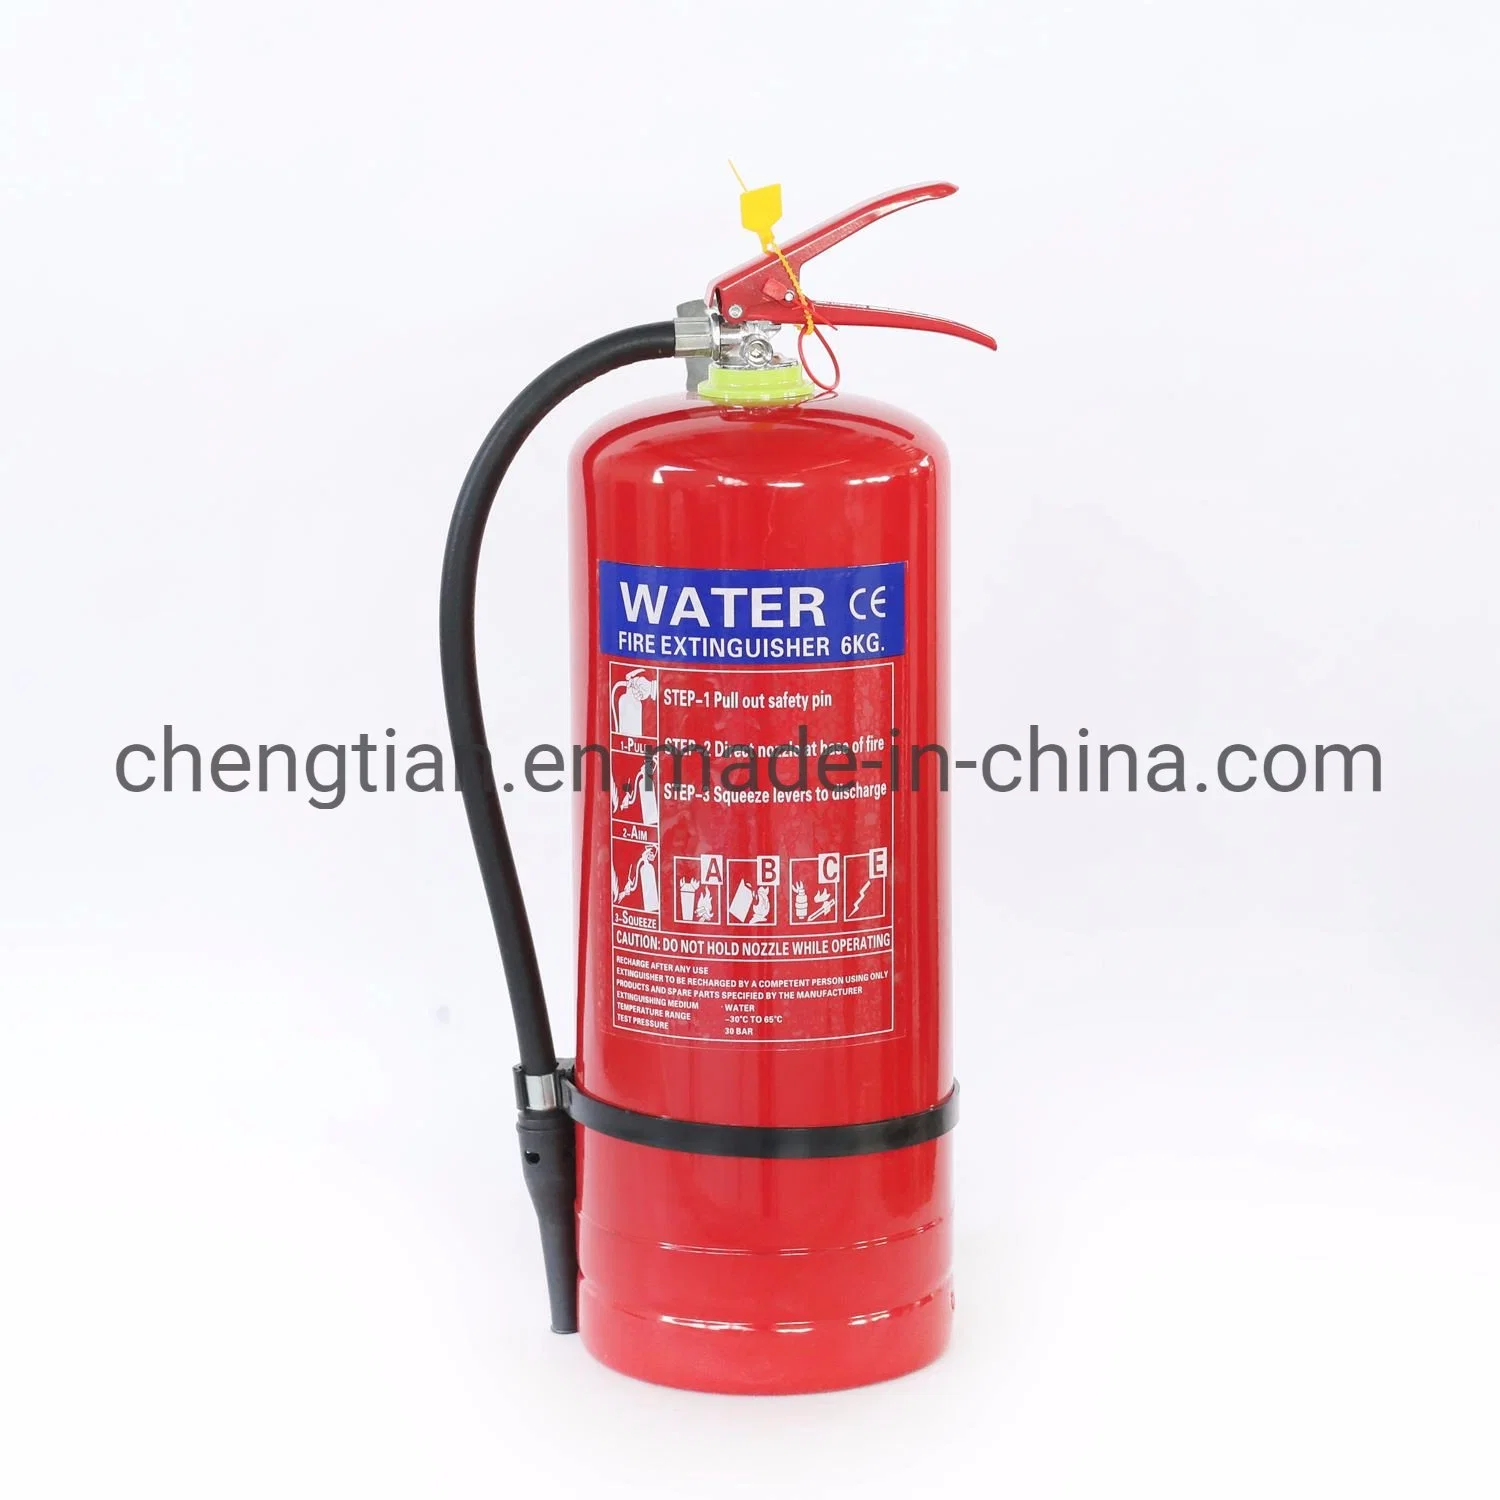 6kg Water Fire Extinguisher with CE Standard